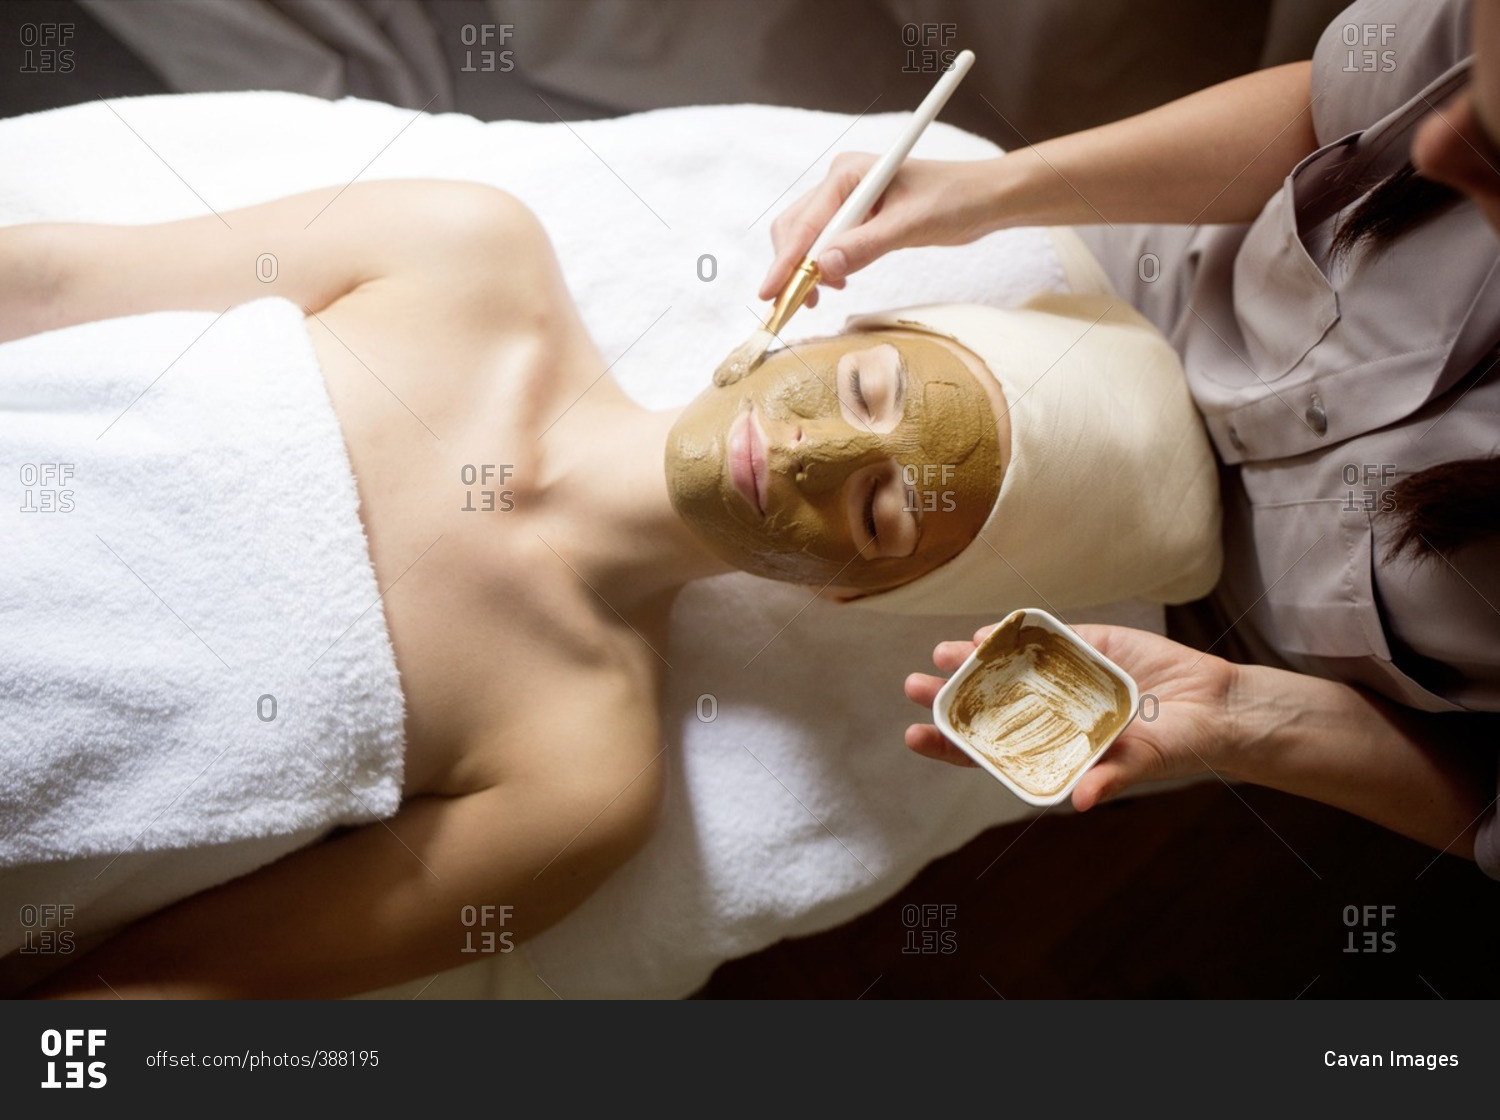 Overhead view of female therapist applying facial mask on woman's face in spa